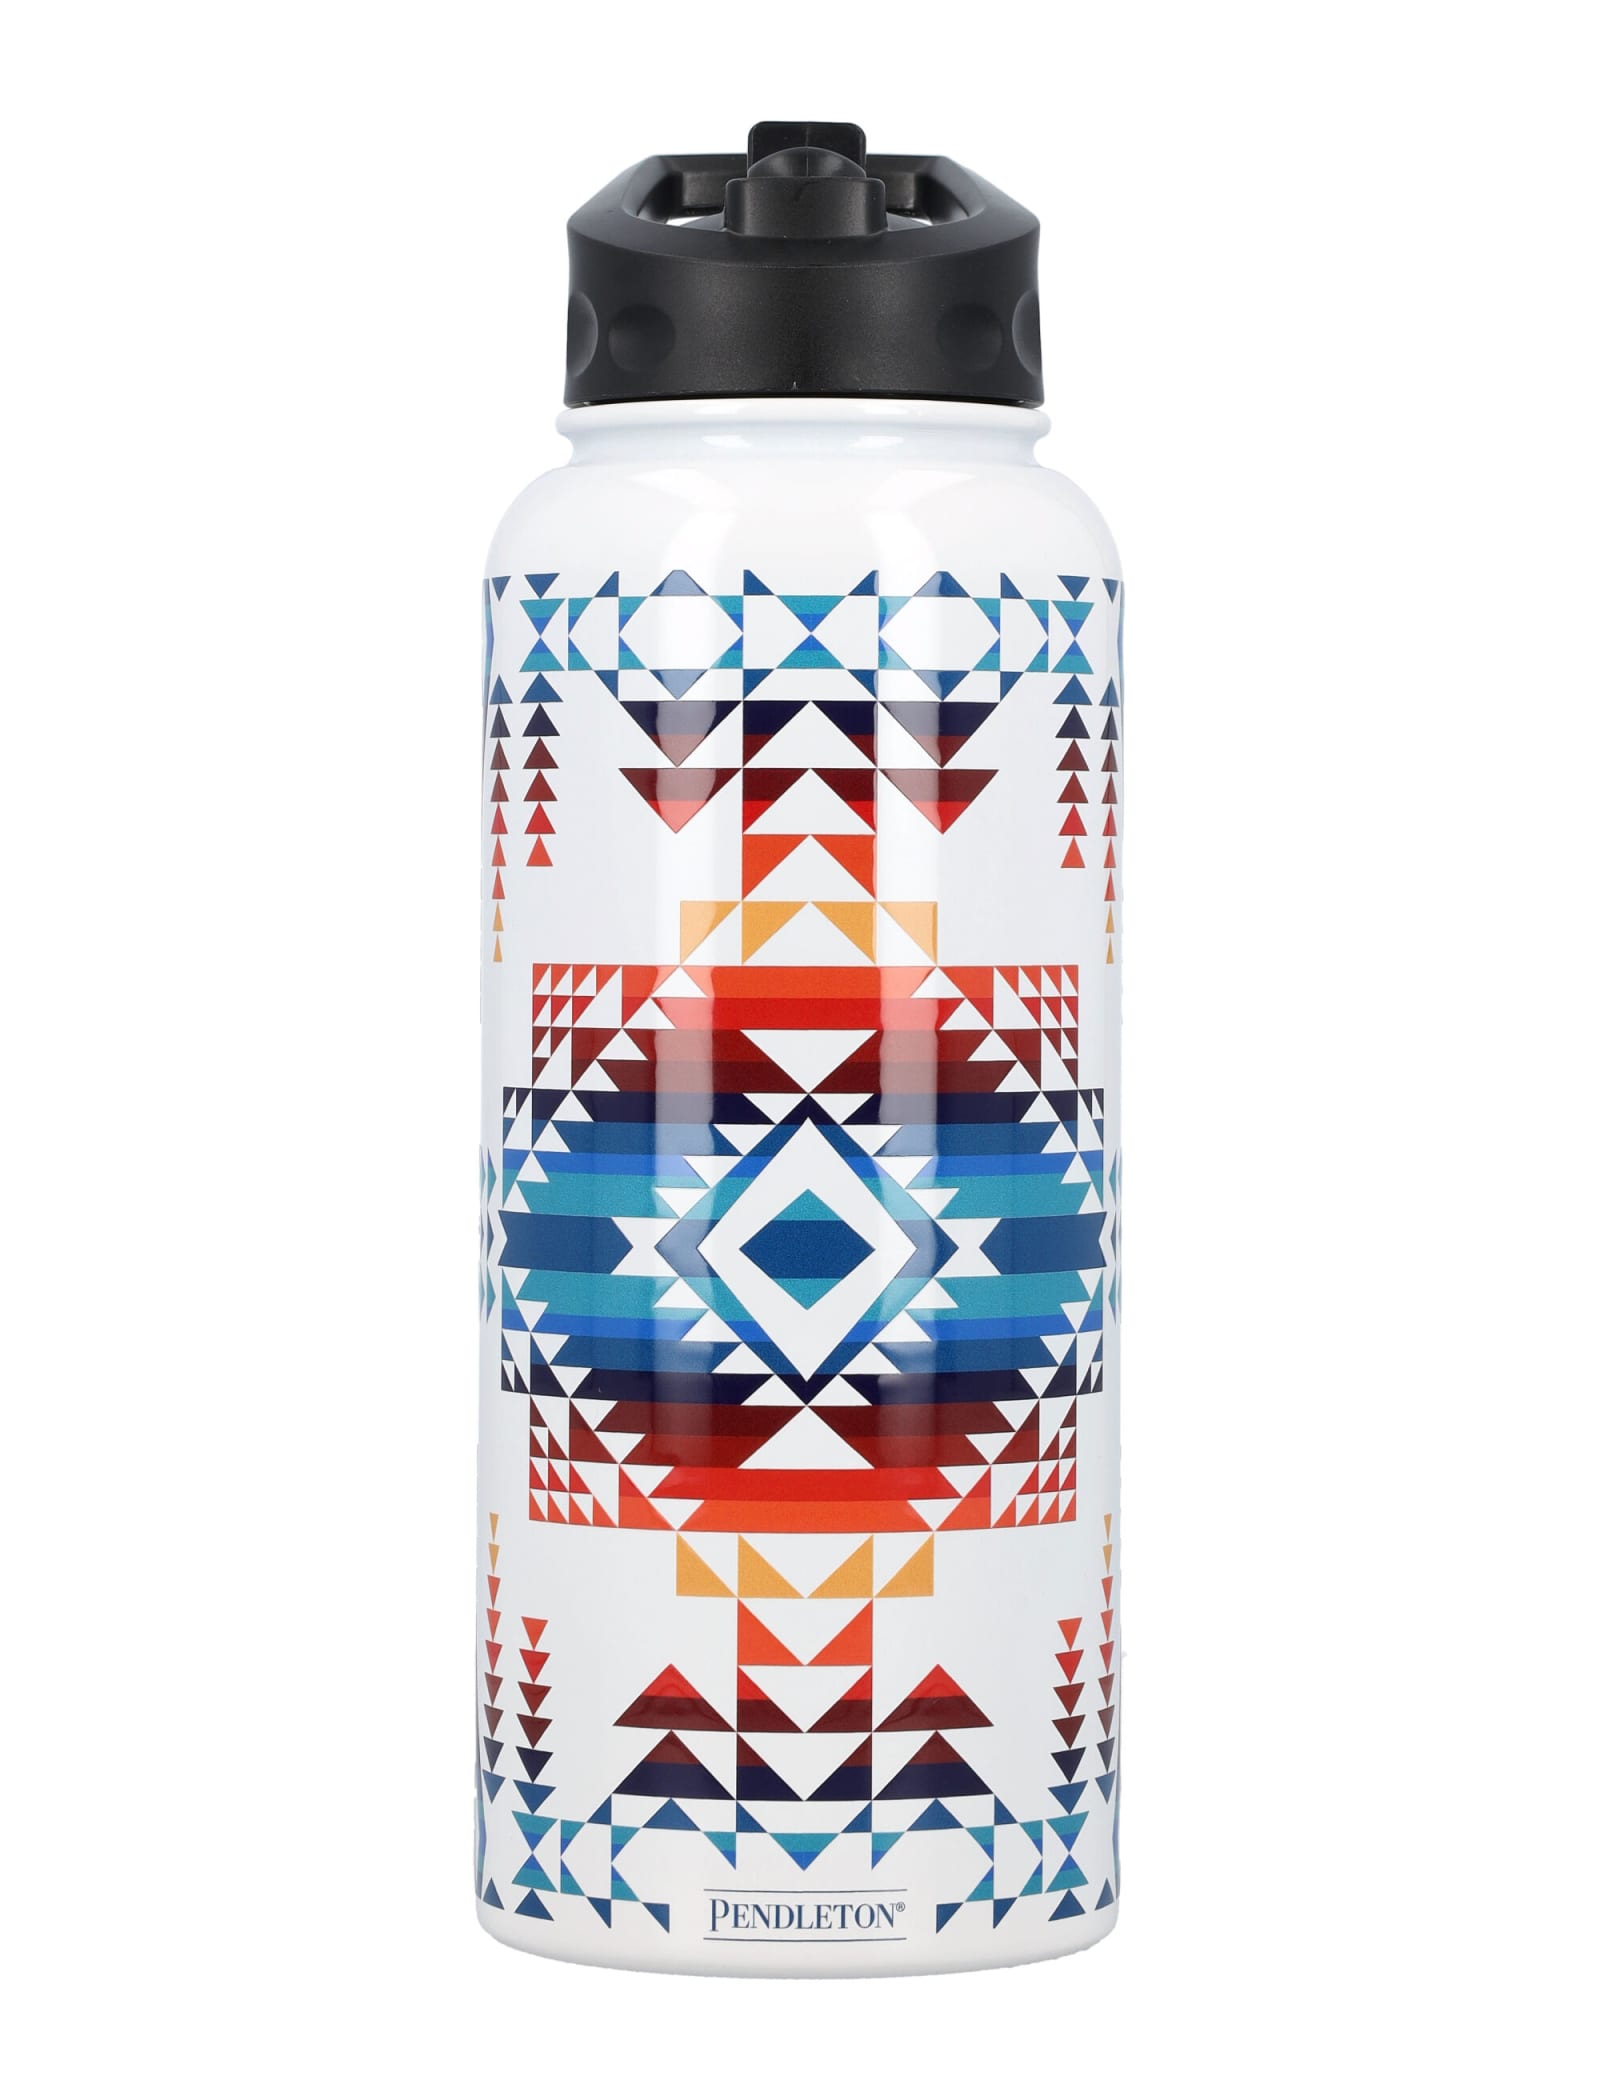 Pendleton Insulated 1l Bottle In Pilot Rock Ivory